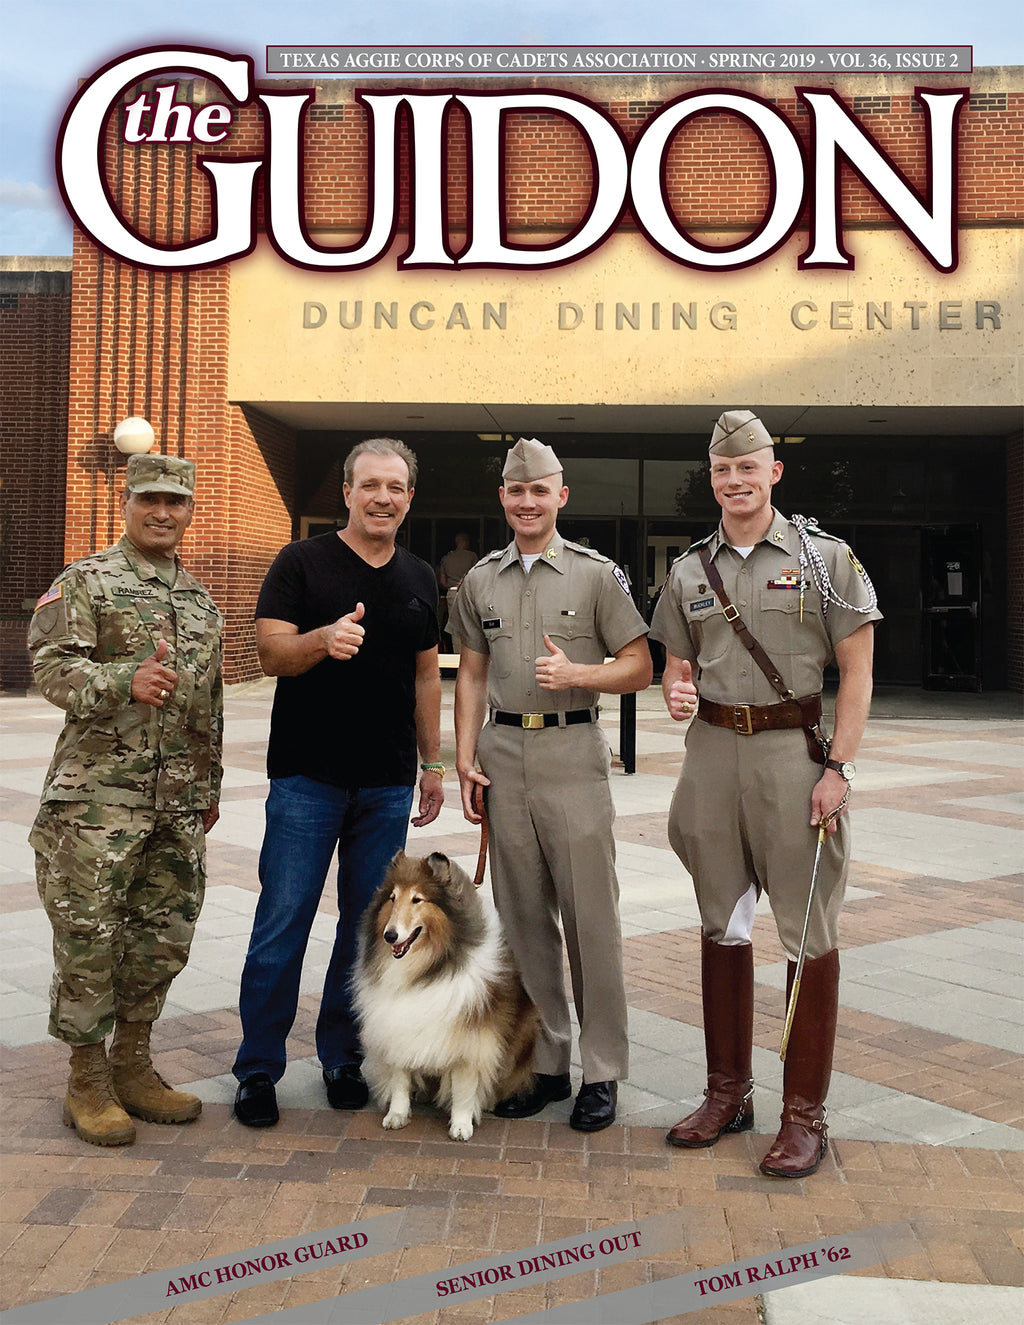 The Guidon 2019 Volume 36, Issue 2